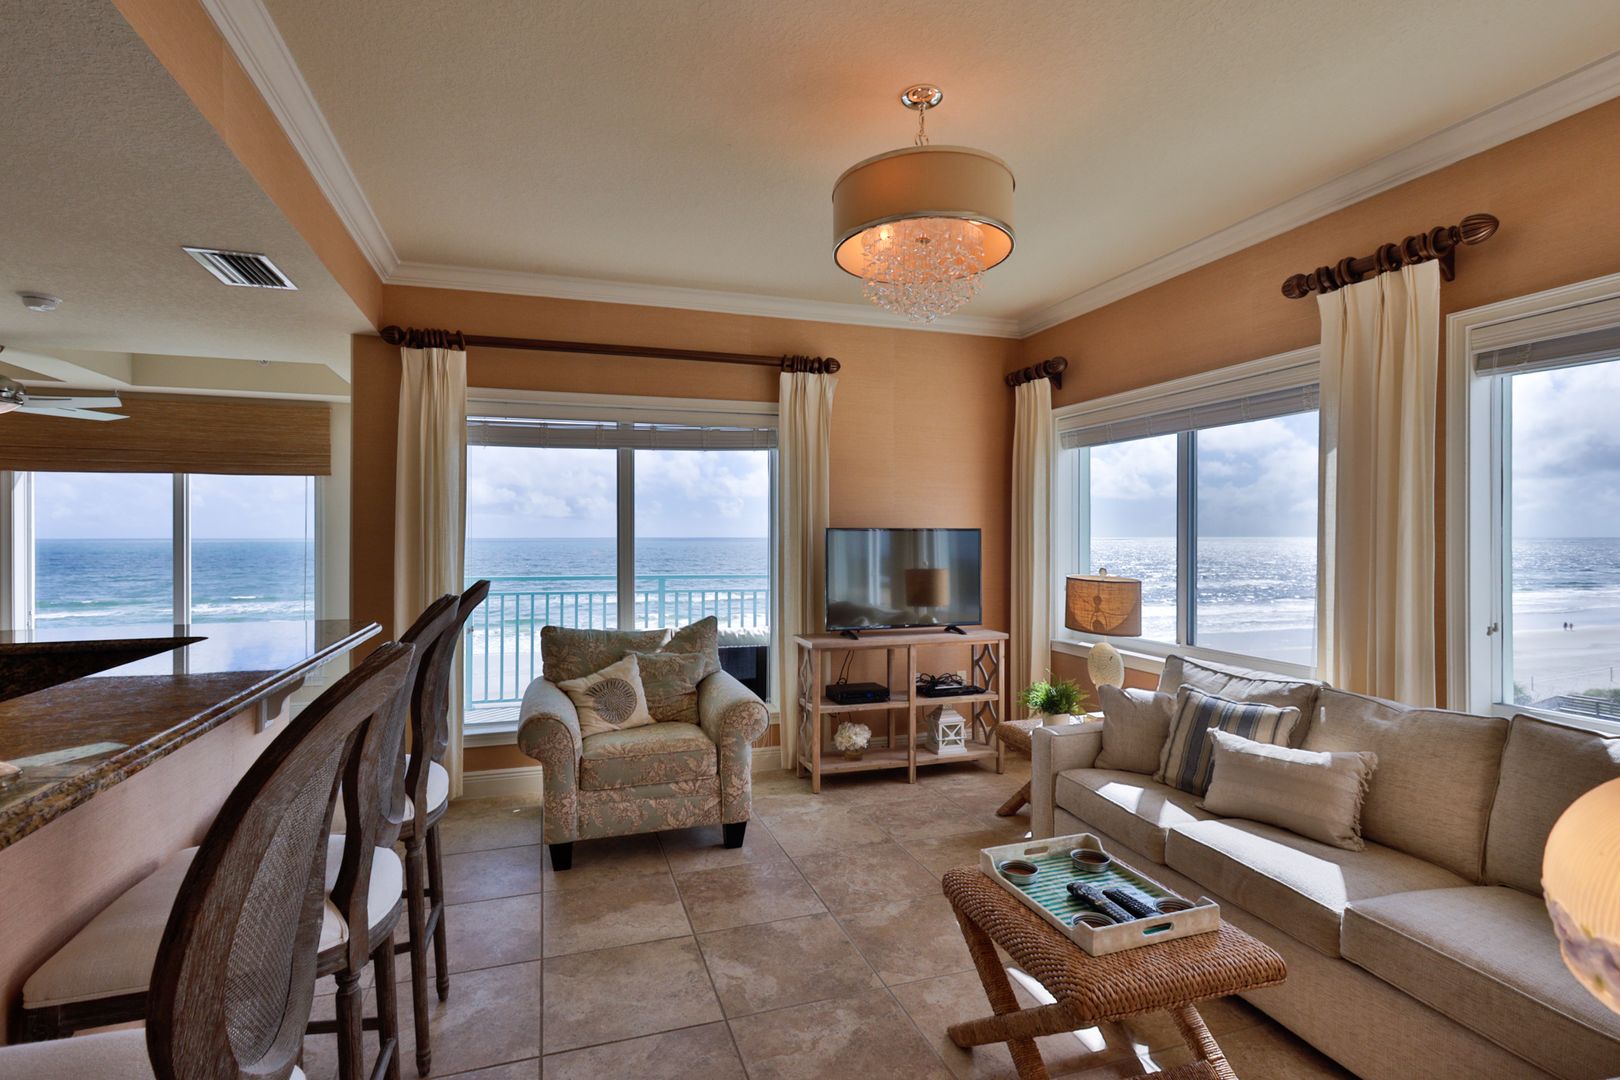 Oceanfront Condo 2 bed/ 2ba Beautifully Decorated and Furnished